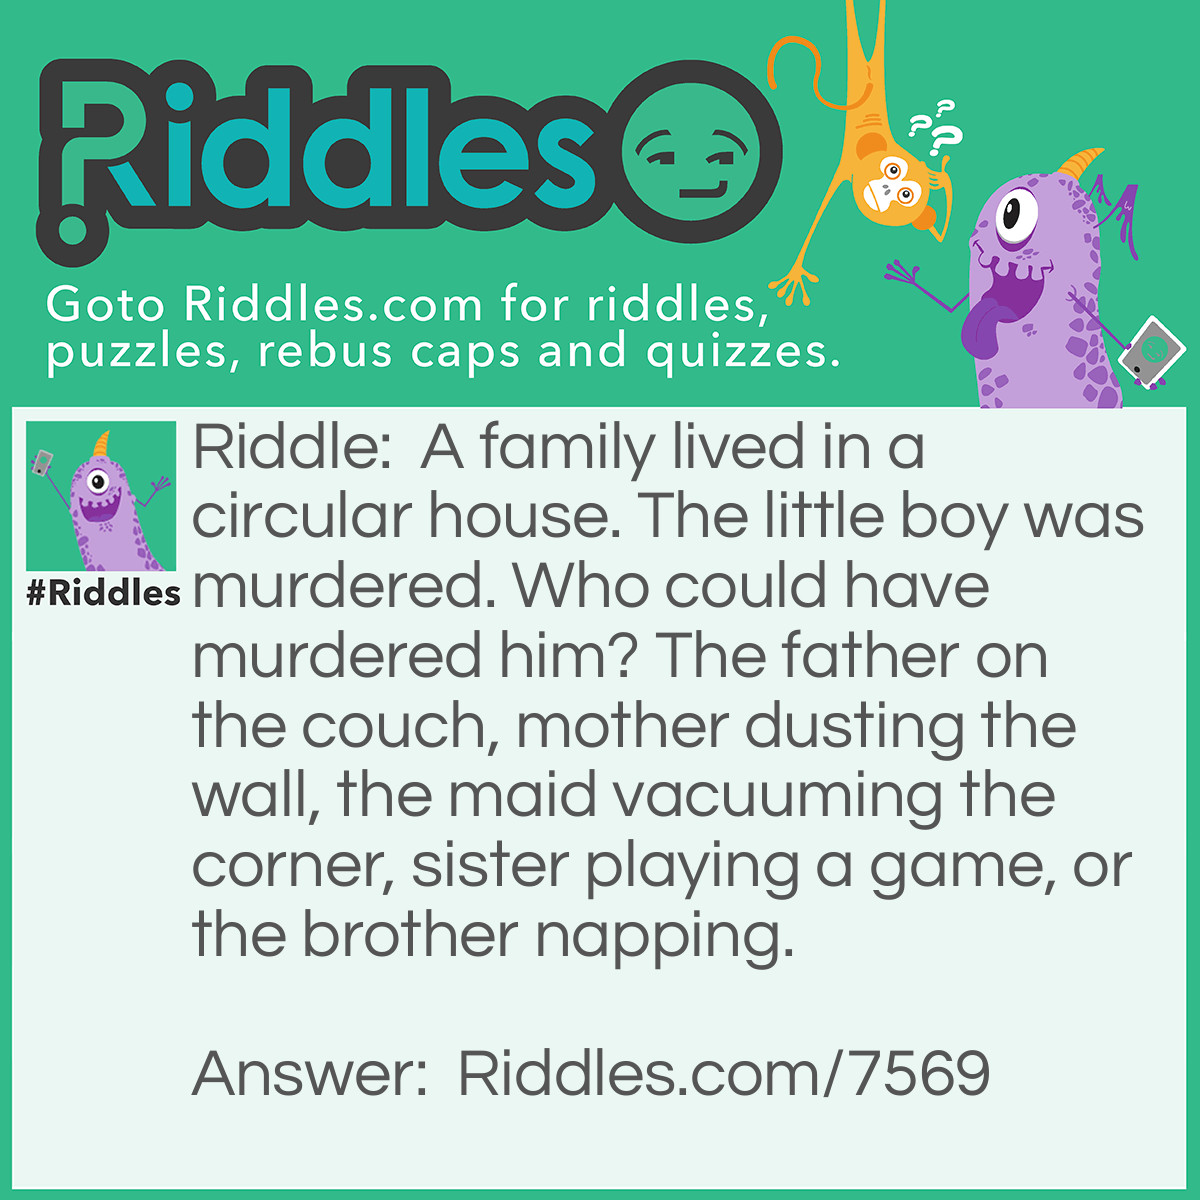 Riddle: A family lived in a circular house. The little boy was murdered. Who could have murdered him? The father on the couch, mother dusting the wall, the maid vacuuming the corner, sister playing a game, or the brother napping. Answer: The maid! The maid was vacuuming the corner! There is no corners in a circular house, get it?